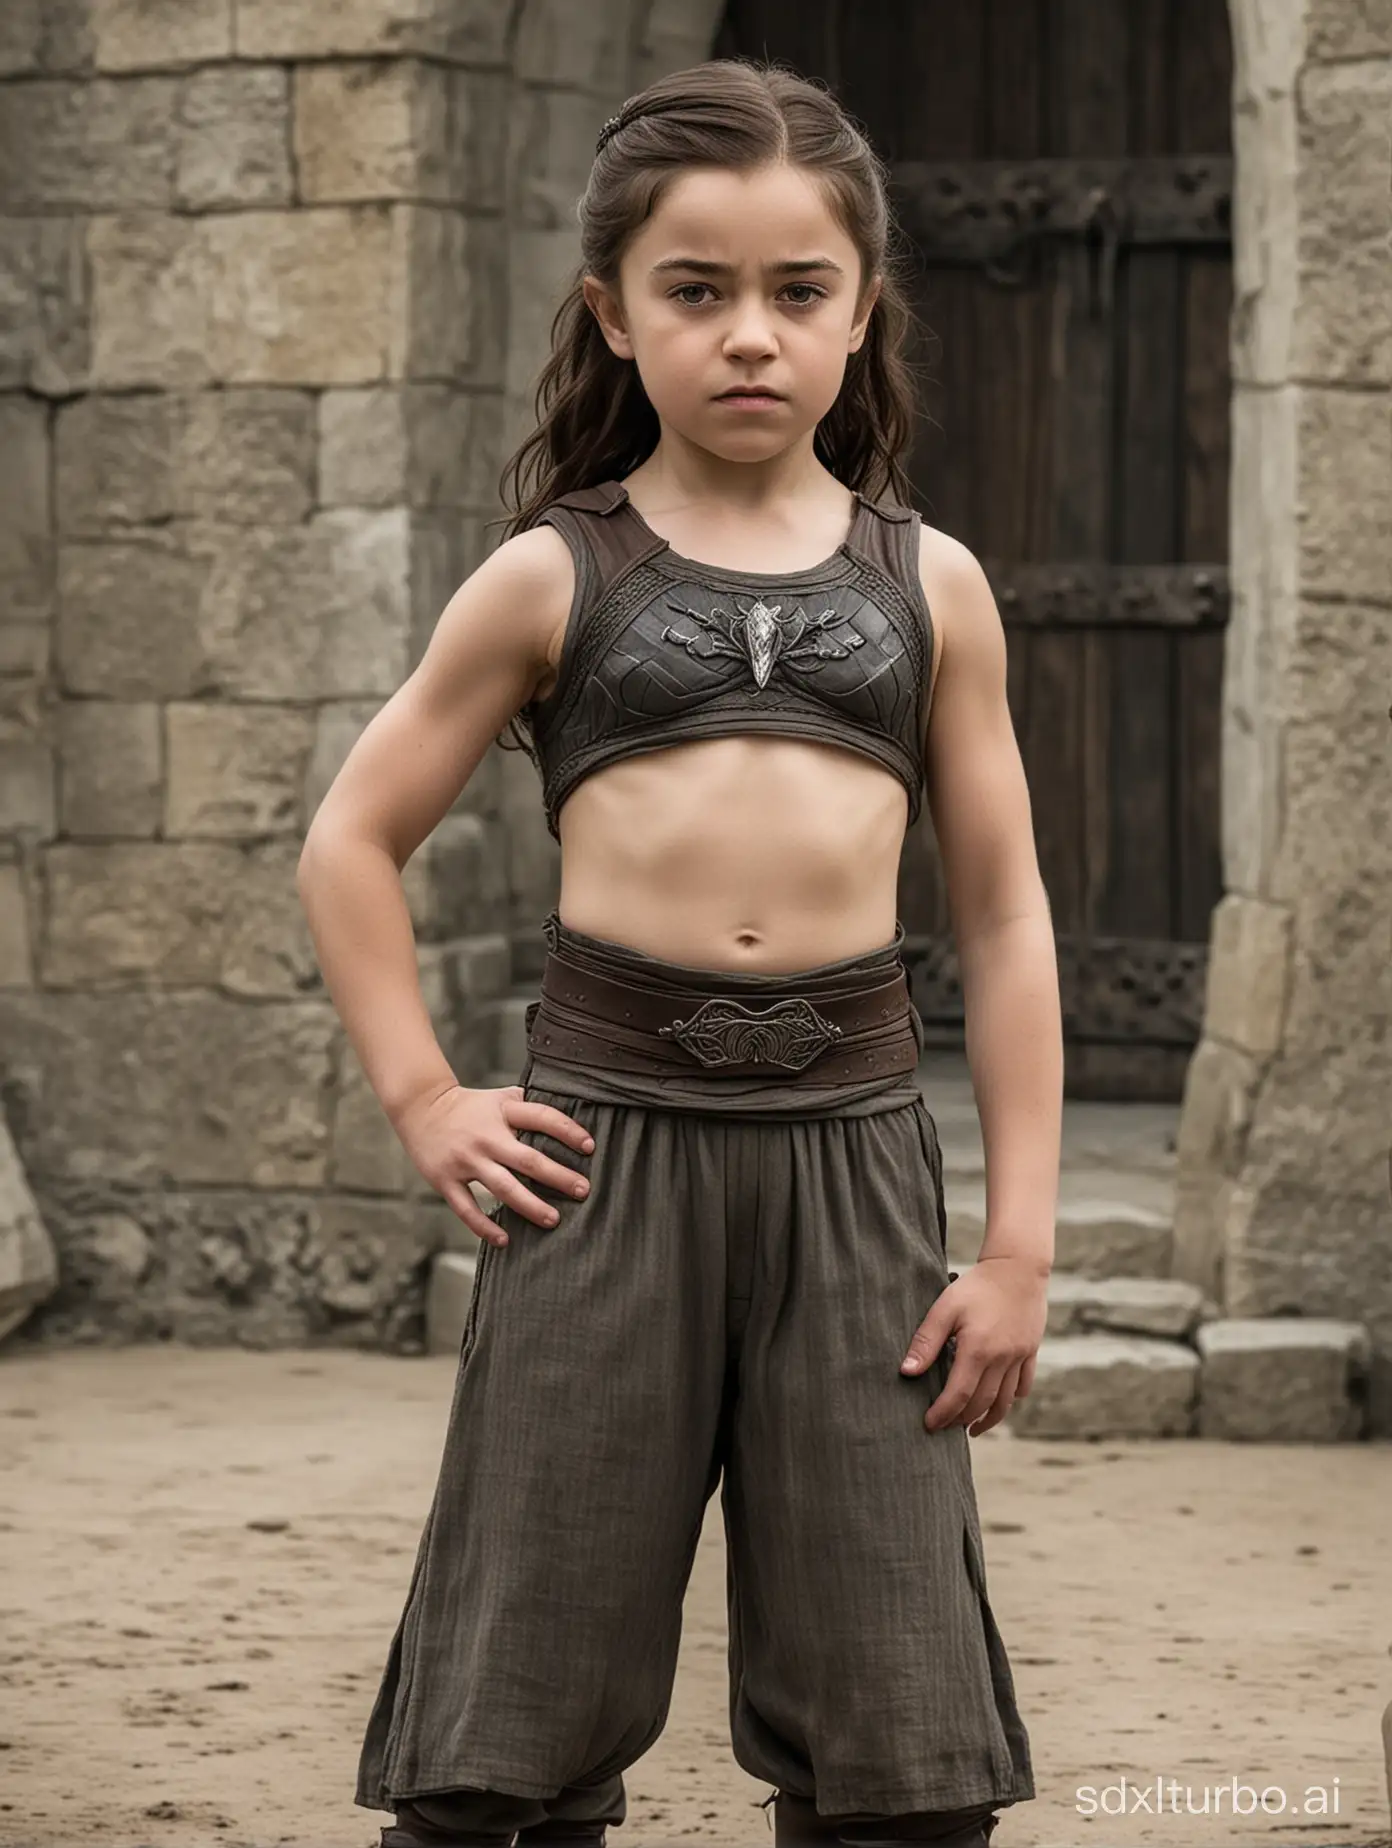 Young-Aria-Stark-Displaying-Muscular-Abs-in-Game-of-Thrones